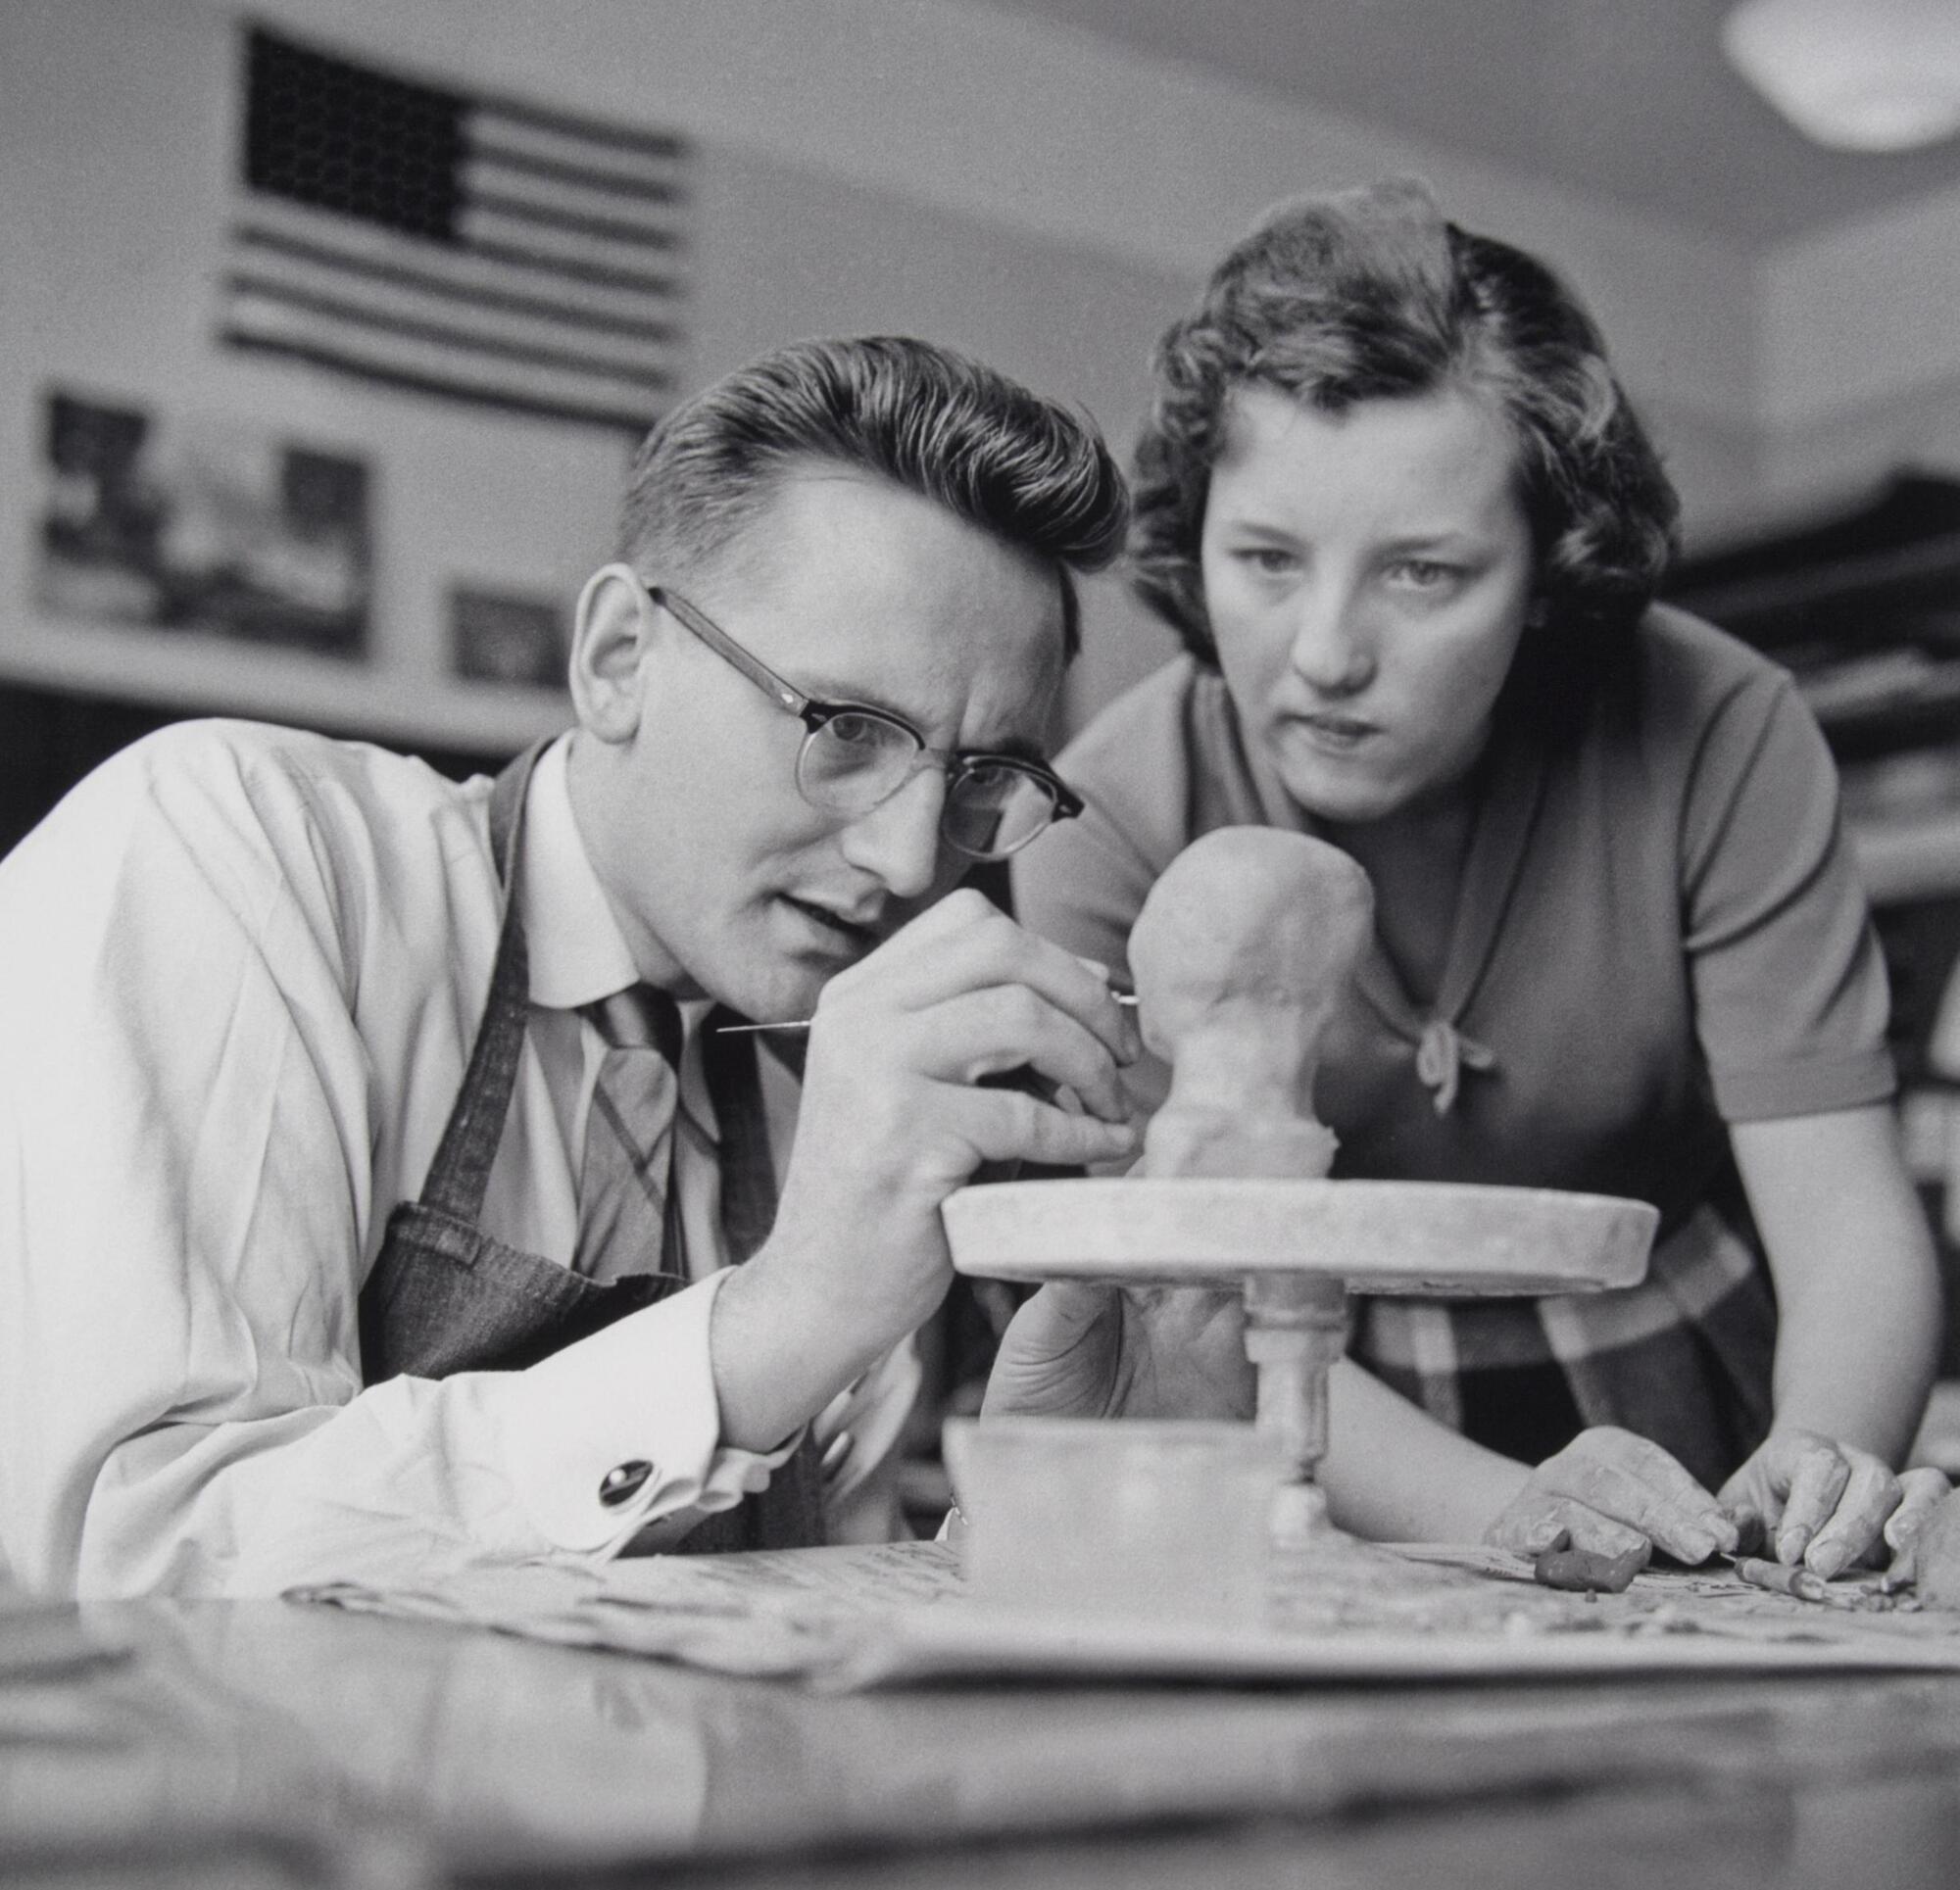 A man and woman working on a sculpture project that is seated on a lazy susan. The man is holding a small metal tool and the woman is looking over his shoulder.